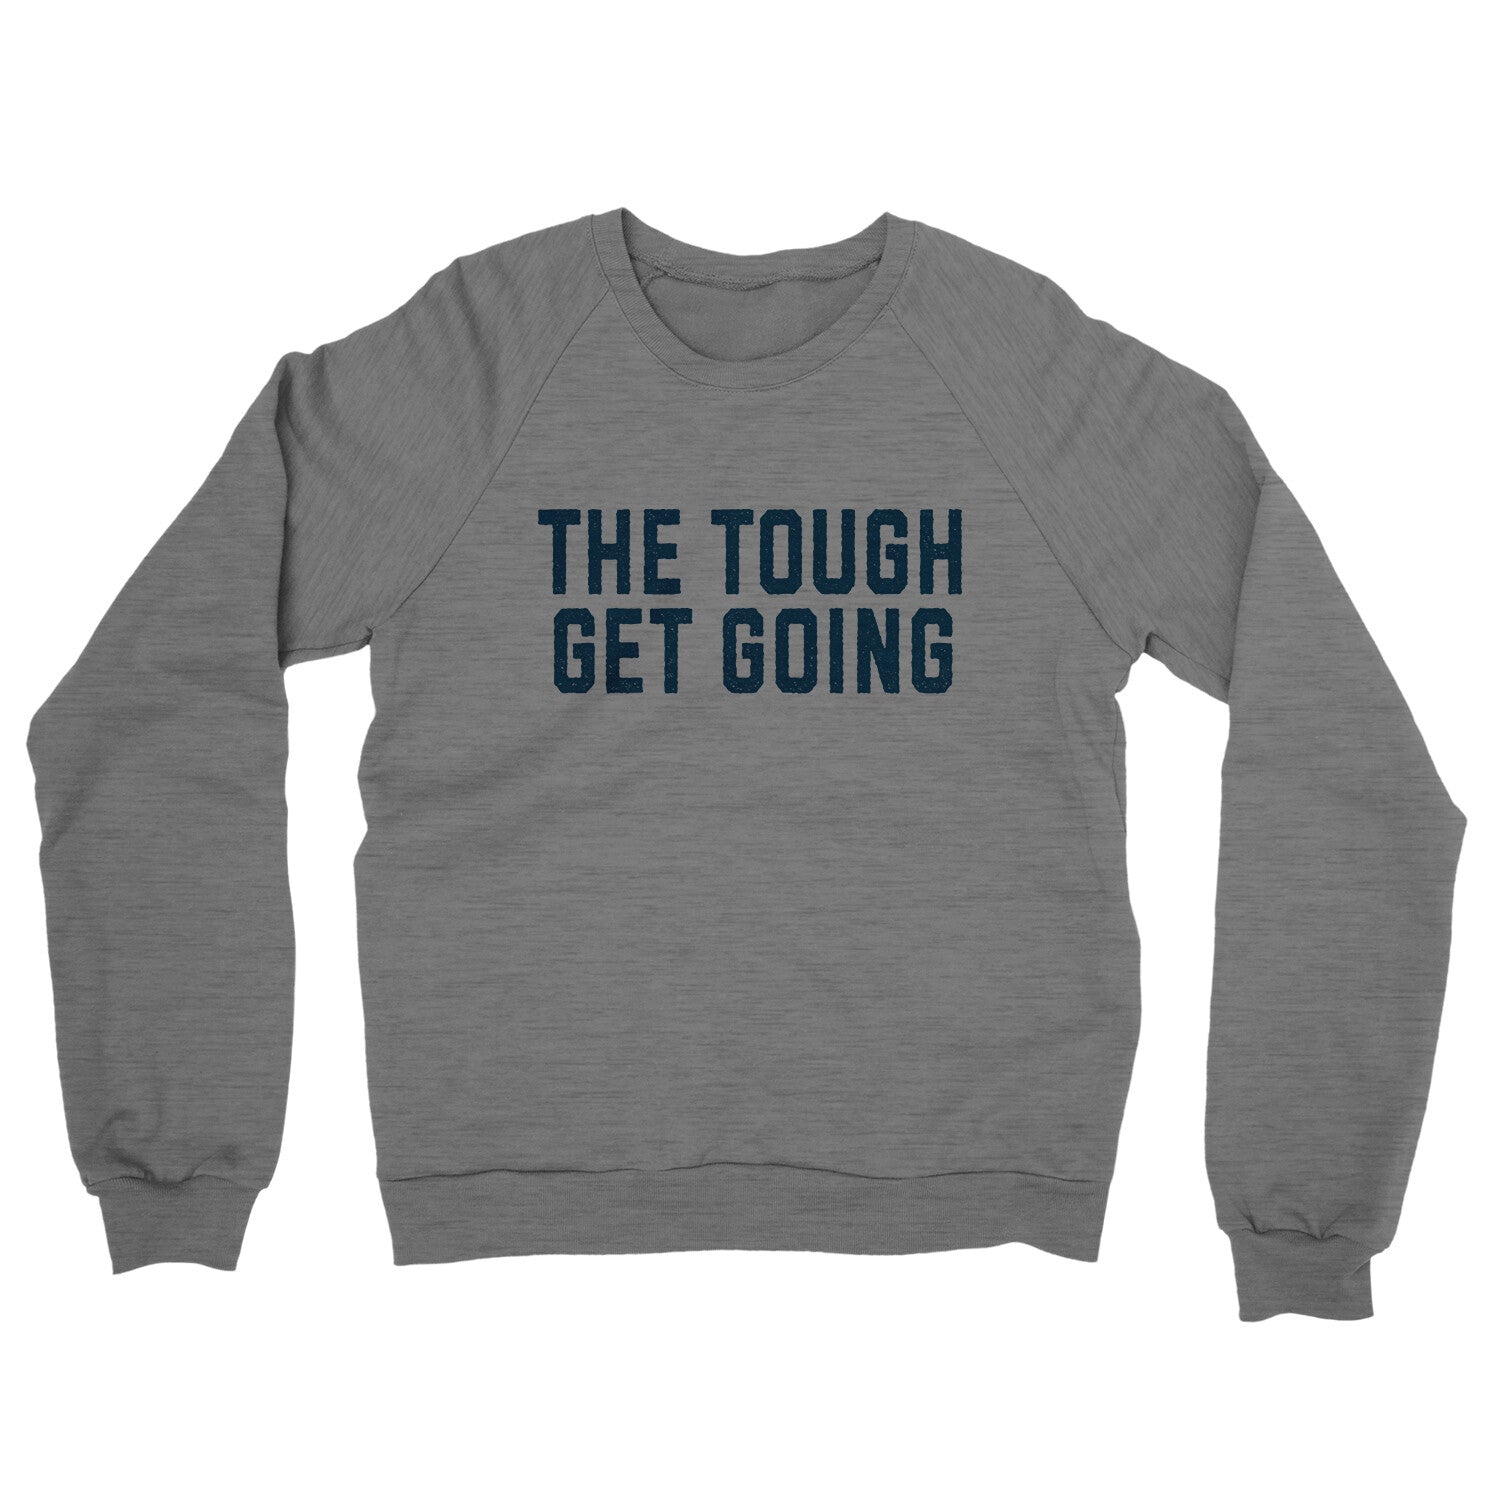 The Tough Get Going in Graphite Heather Color